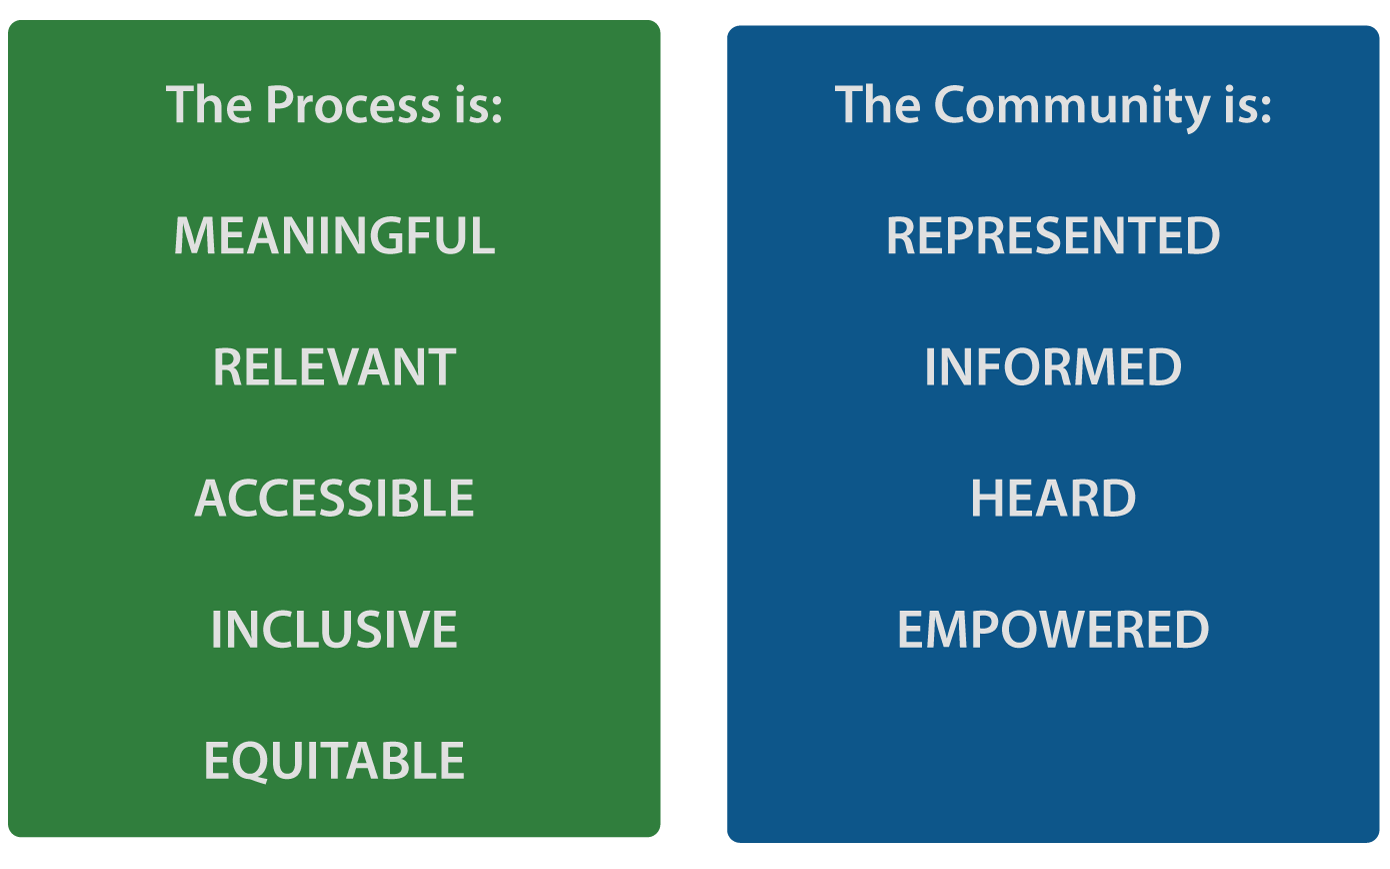 The process is: meaningful, relevant, accessible, inclusive, and equitable. The community is: represented, informed, heard, and empowered. click or press enter to view larger.